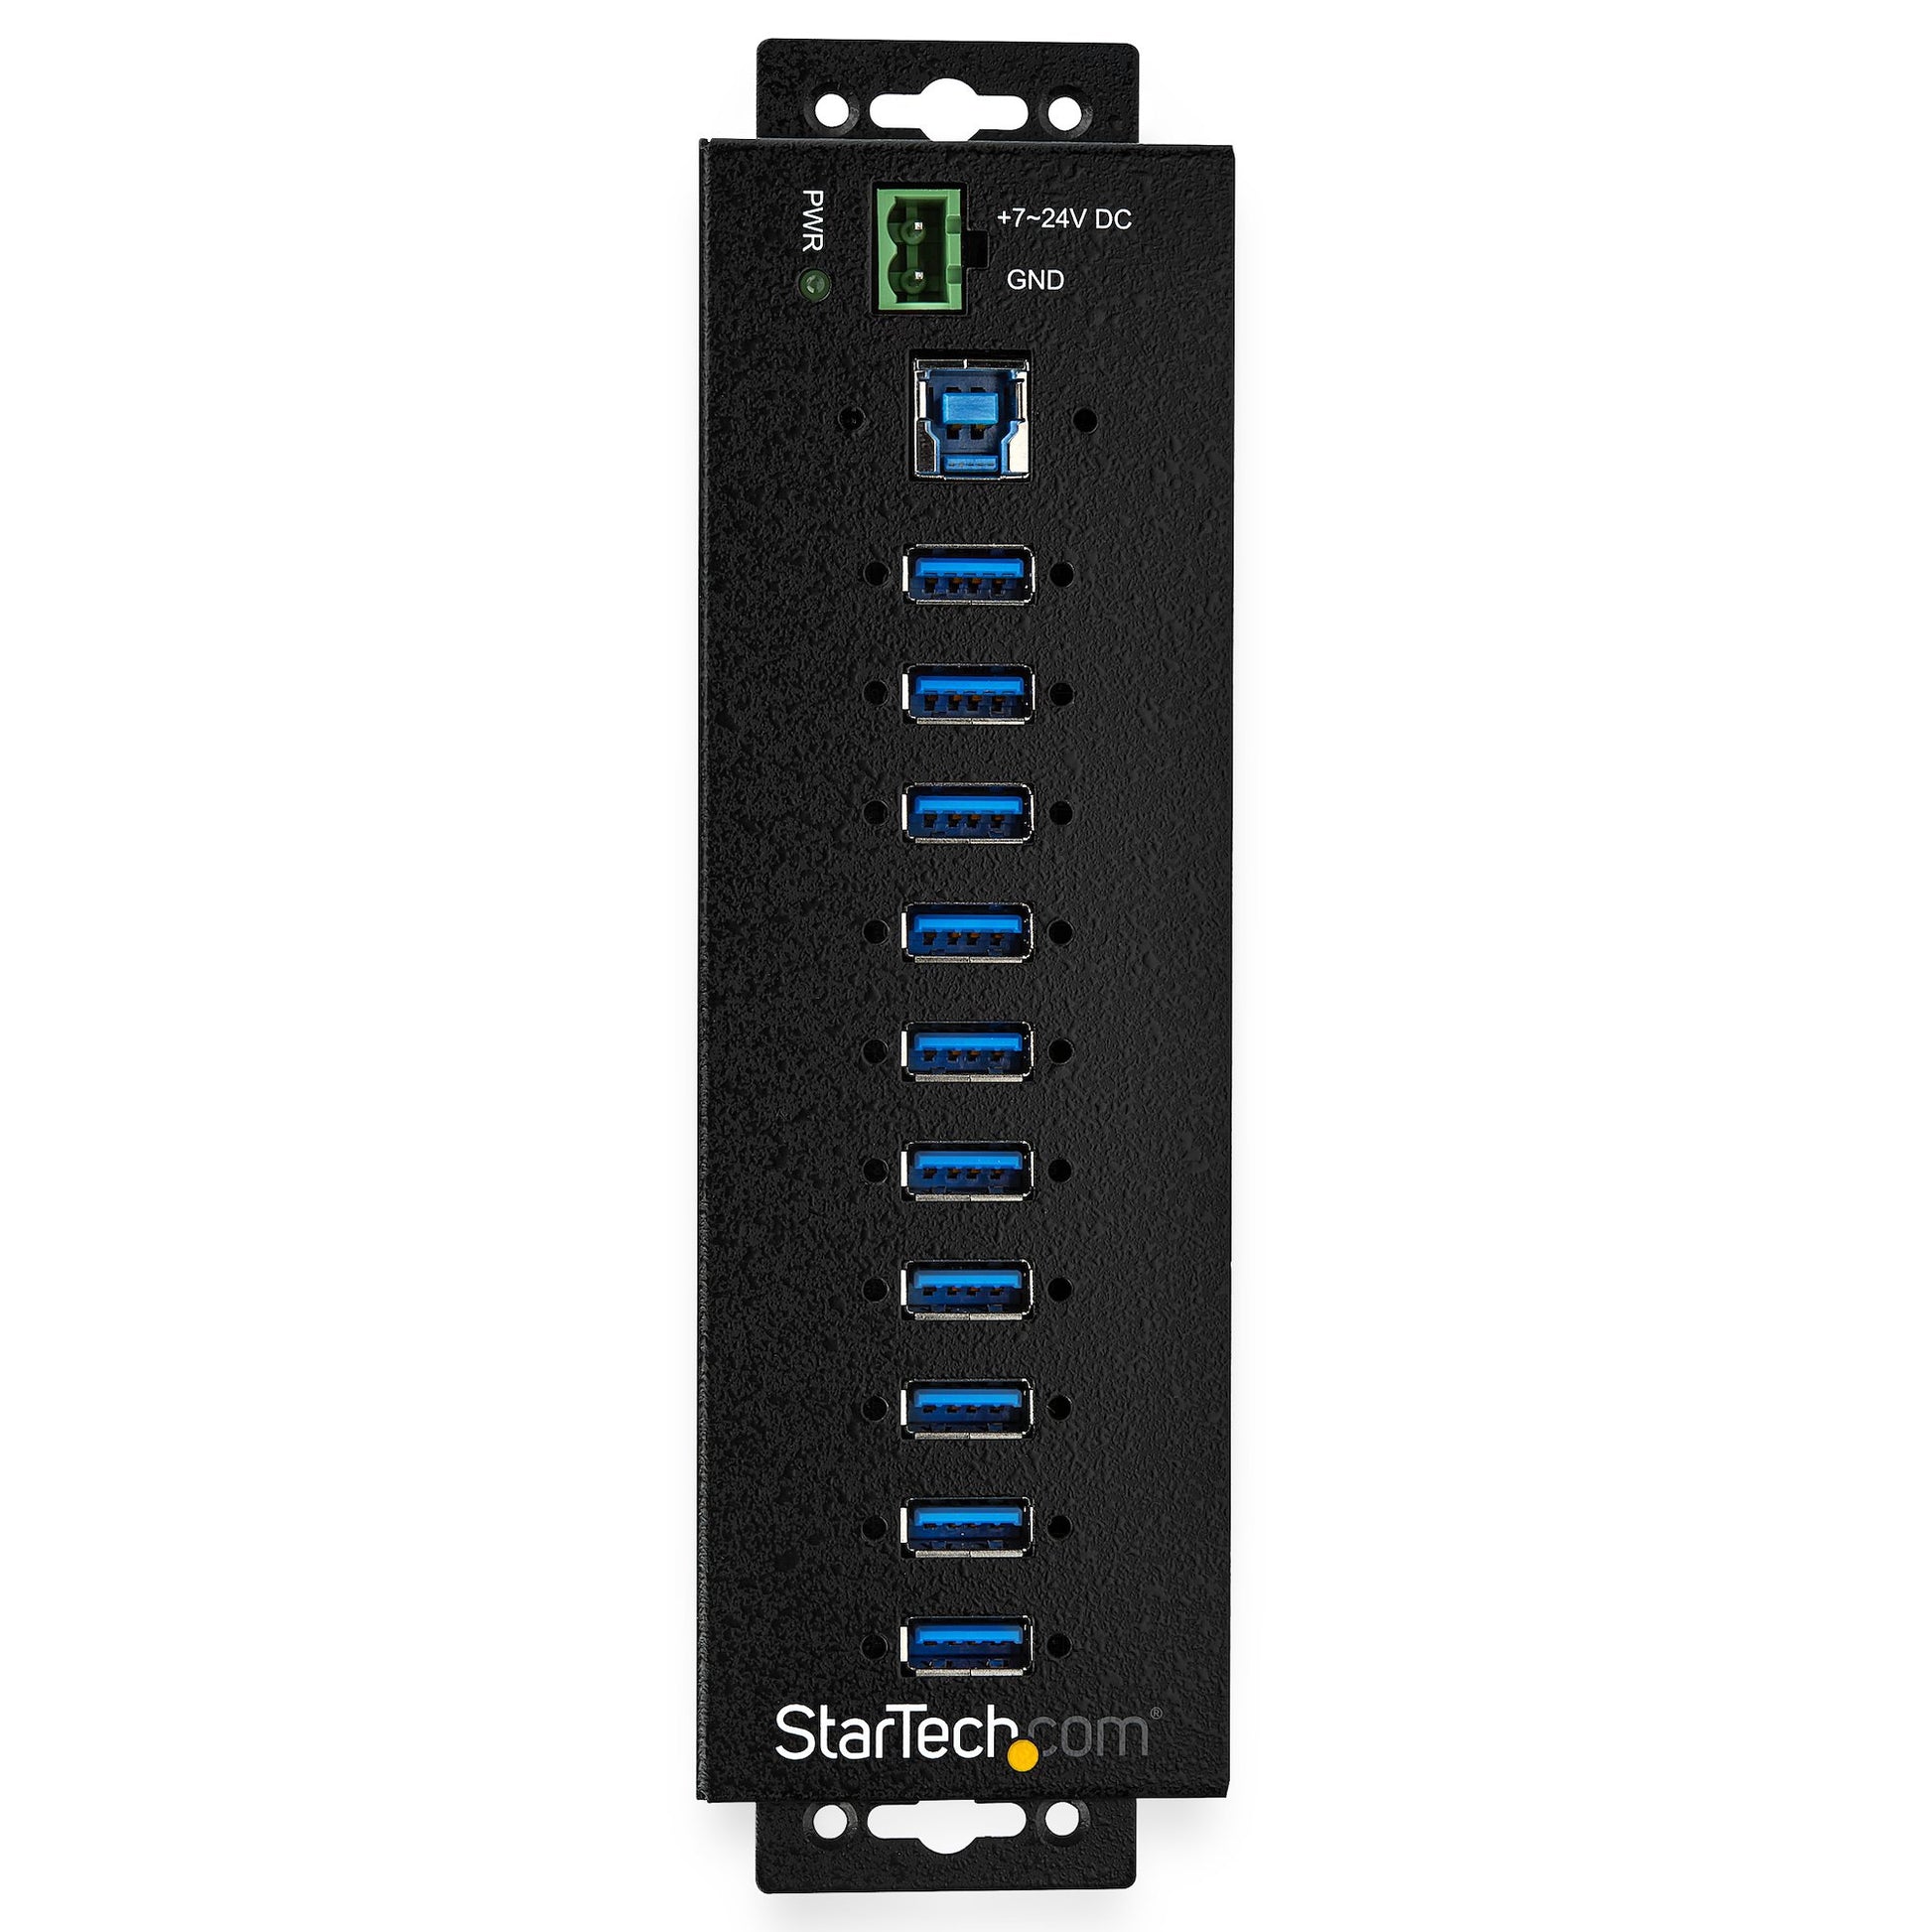 StarTech.com 10-Port USB 3.0 Hub with Power Adapter - Metal Industrial USB-A Hub with ESD & 350W Surge Protection - Din/Wall/Desk Mountable - High Speed USB 3.2 Gen 1 (5Gbps) Hub-2